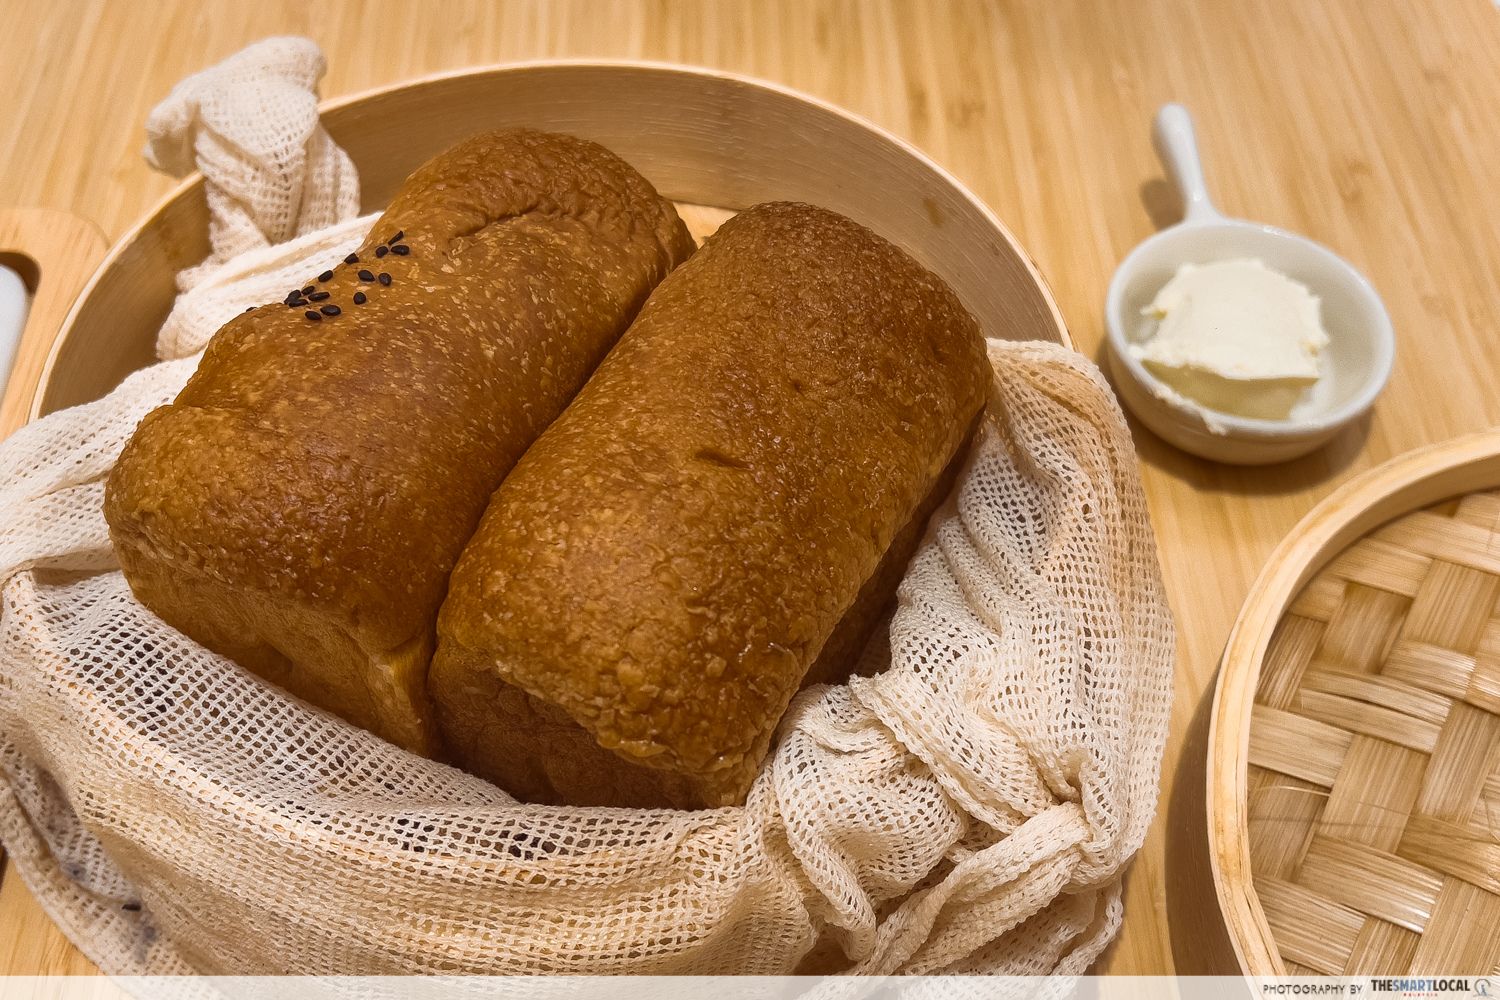 steamed bread in a bamboo basket with a cream on the side